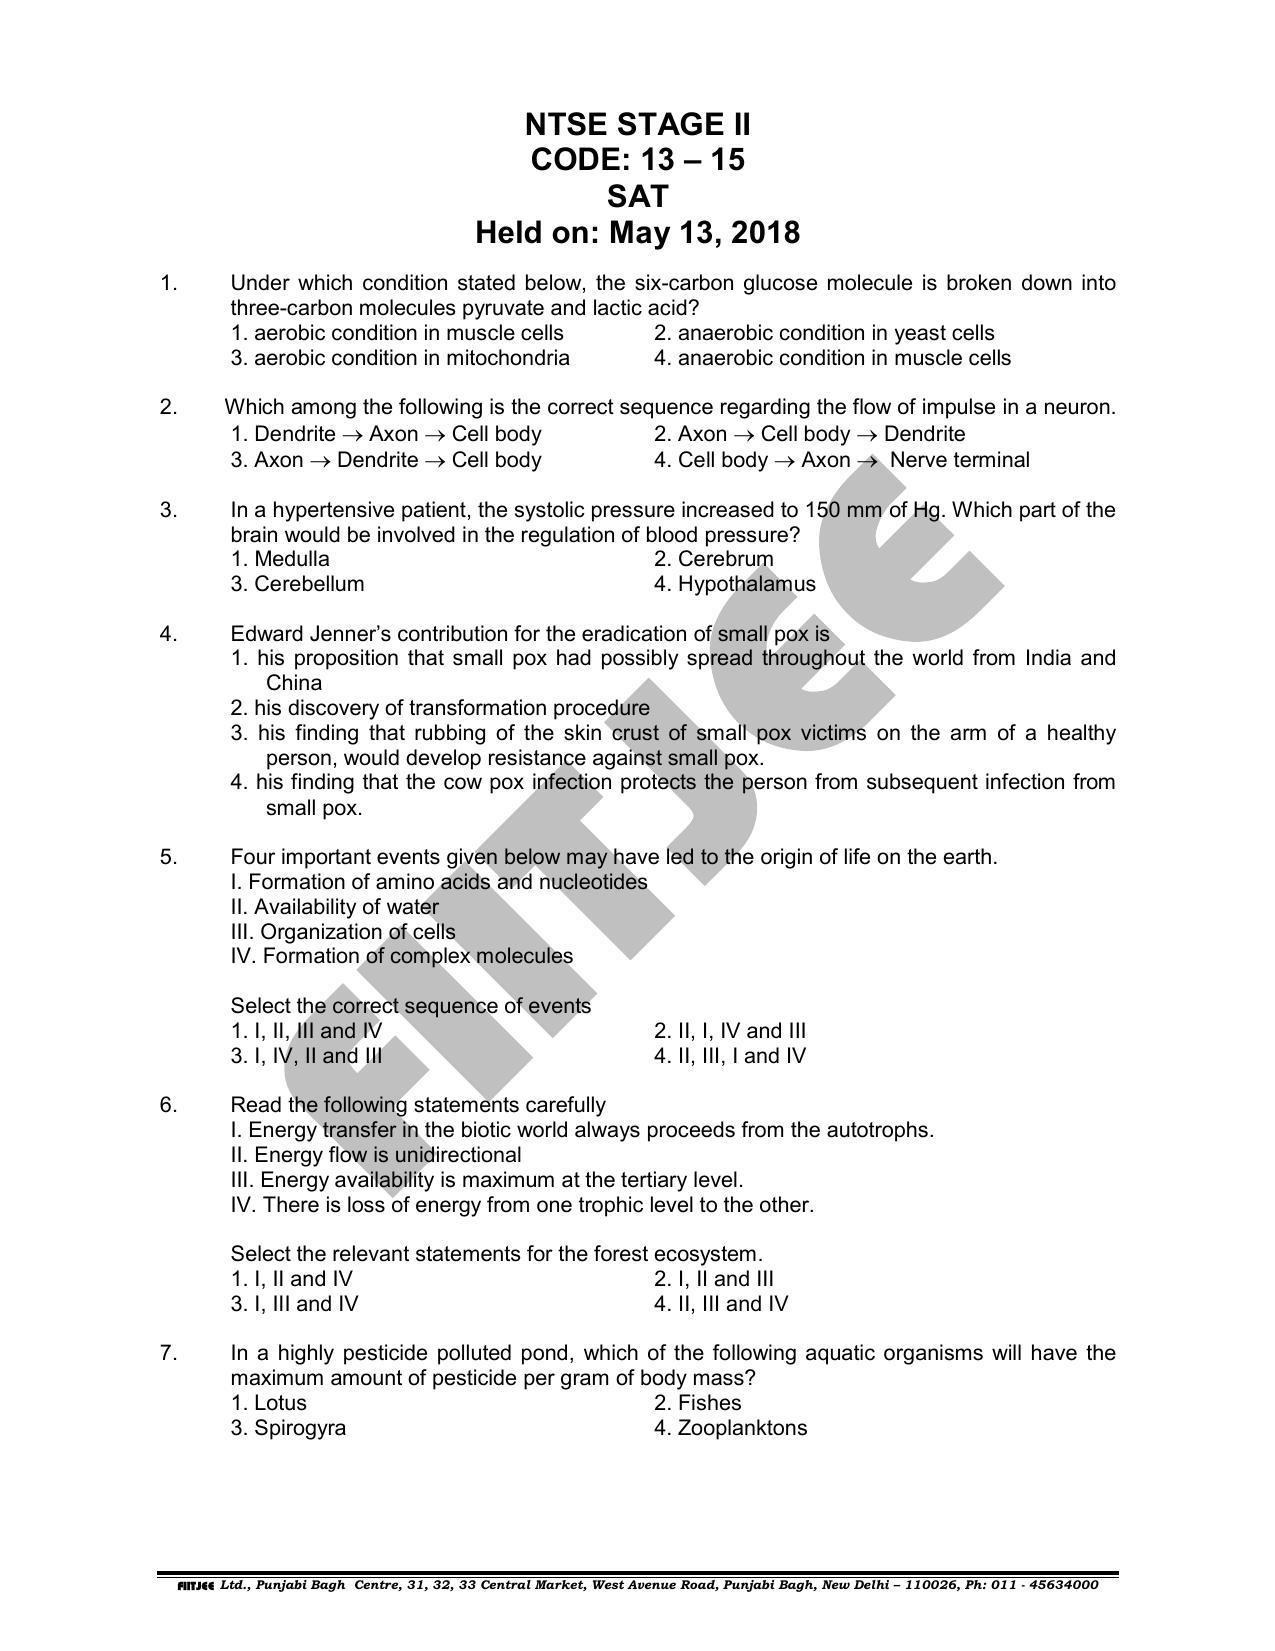 NTSE 2018 (Stage II) SAT Question Paper (May 13, 2018) - Page 1